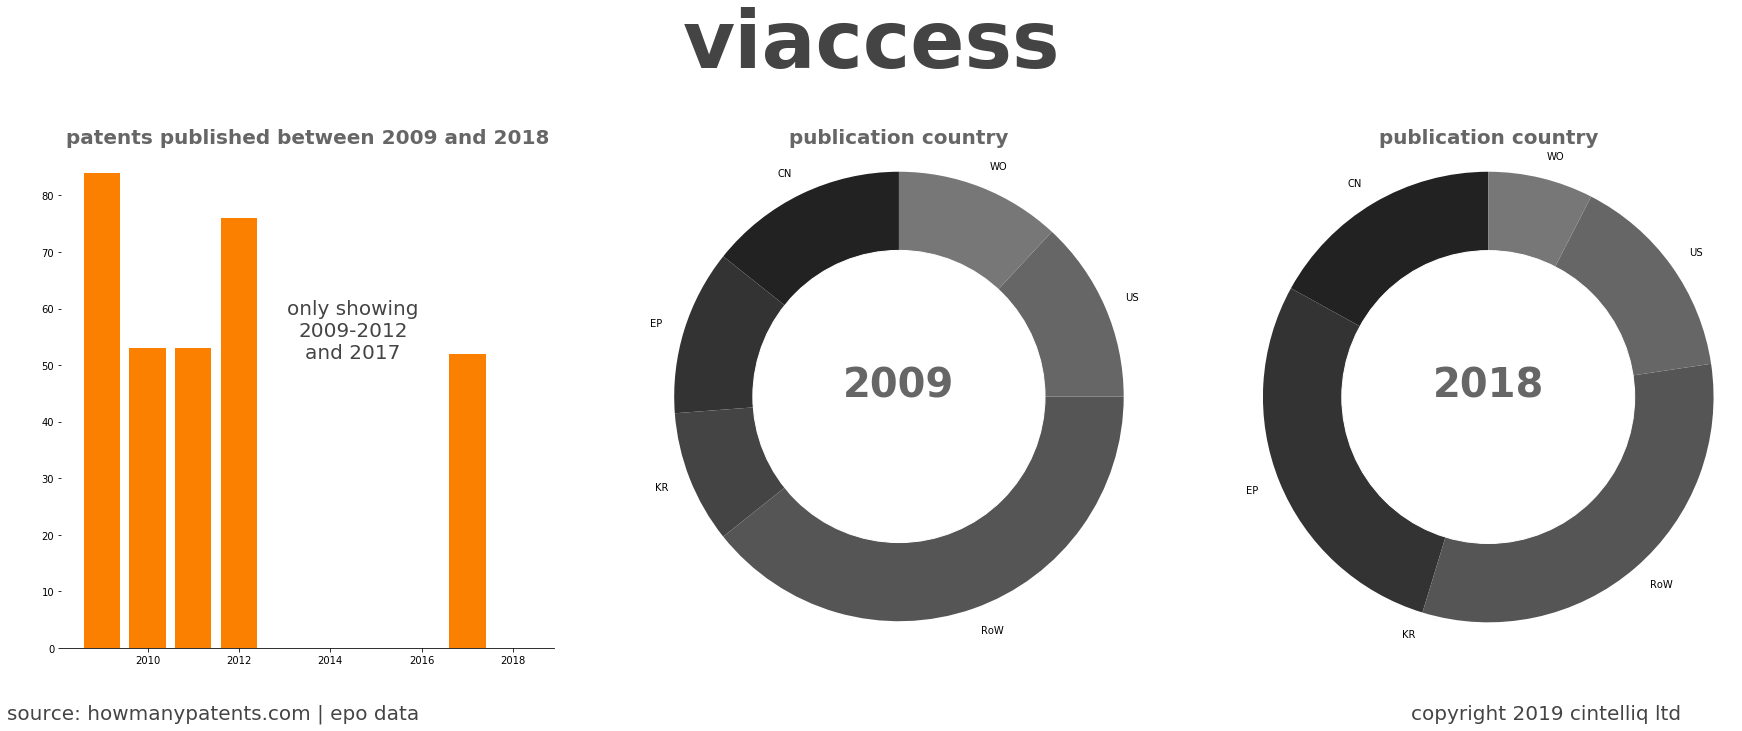 summary of patents for Viaccess